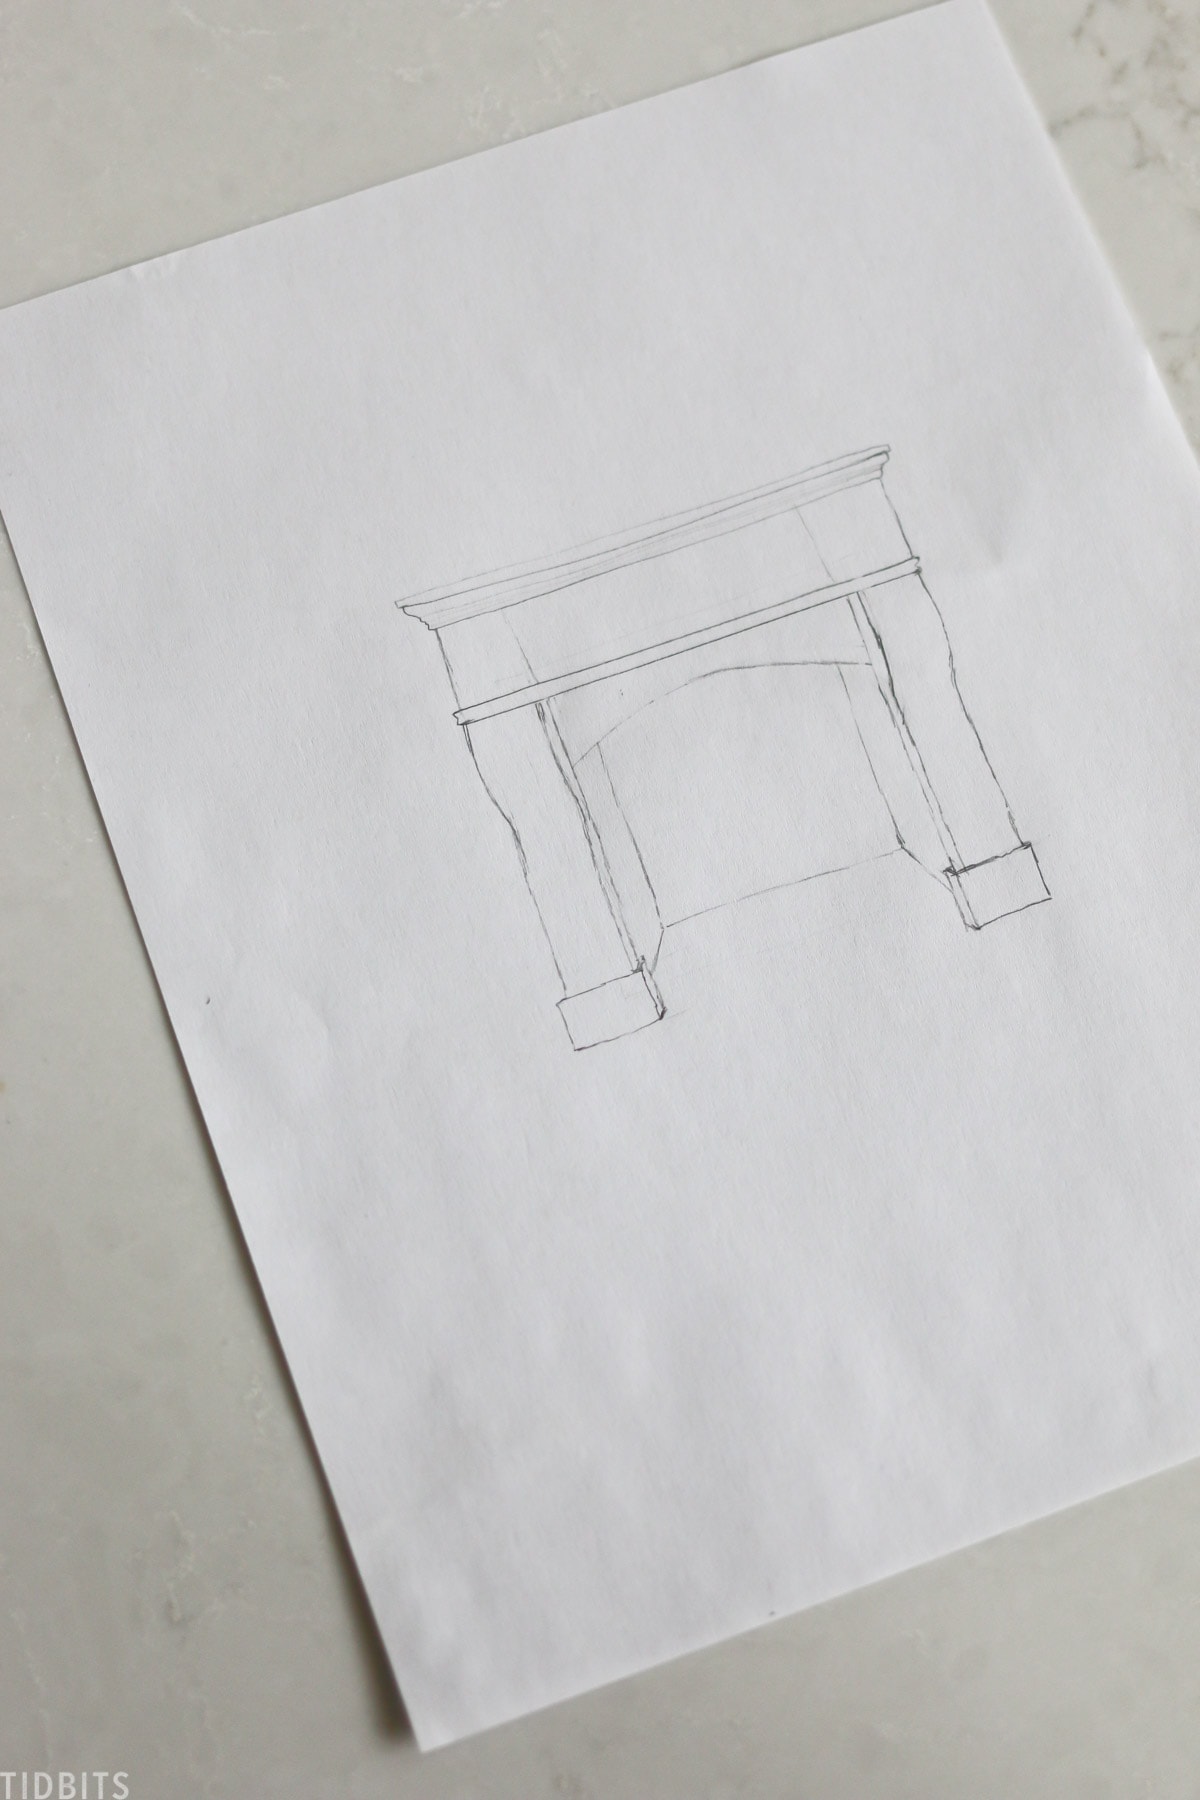 sketch of fireplace surround and mantel